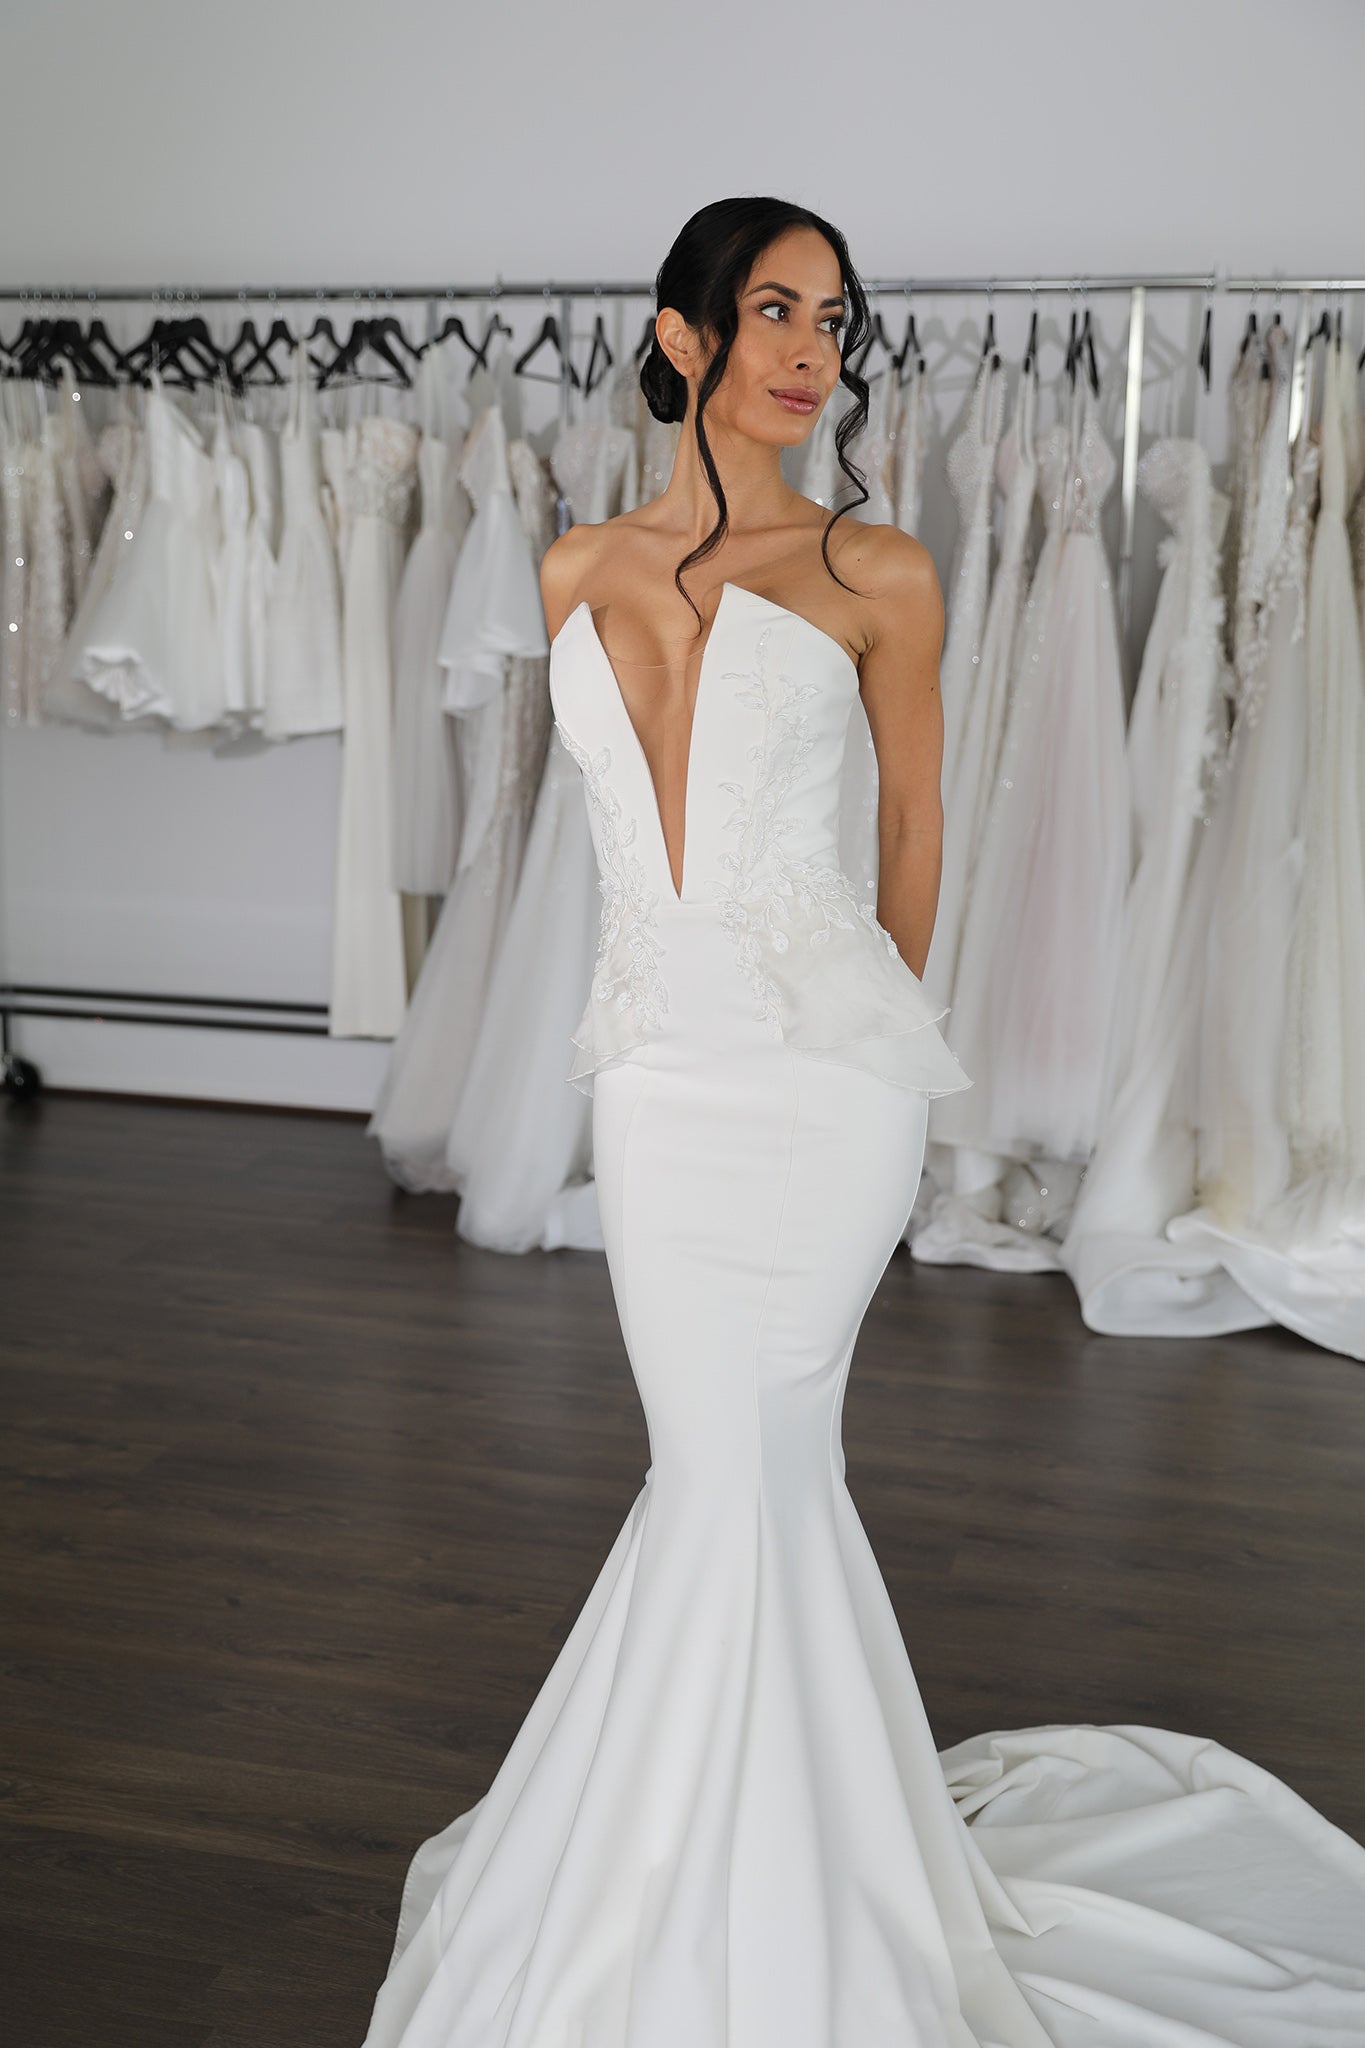 v-neck wedding gown with lace side peplums